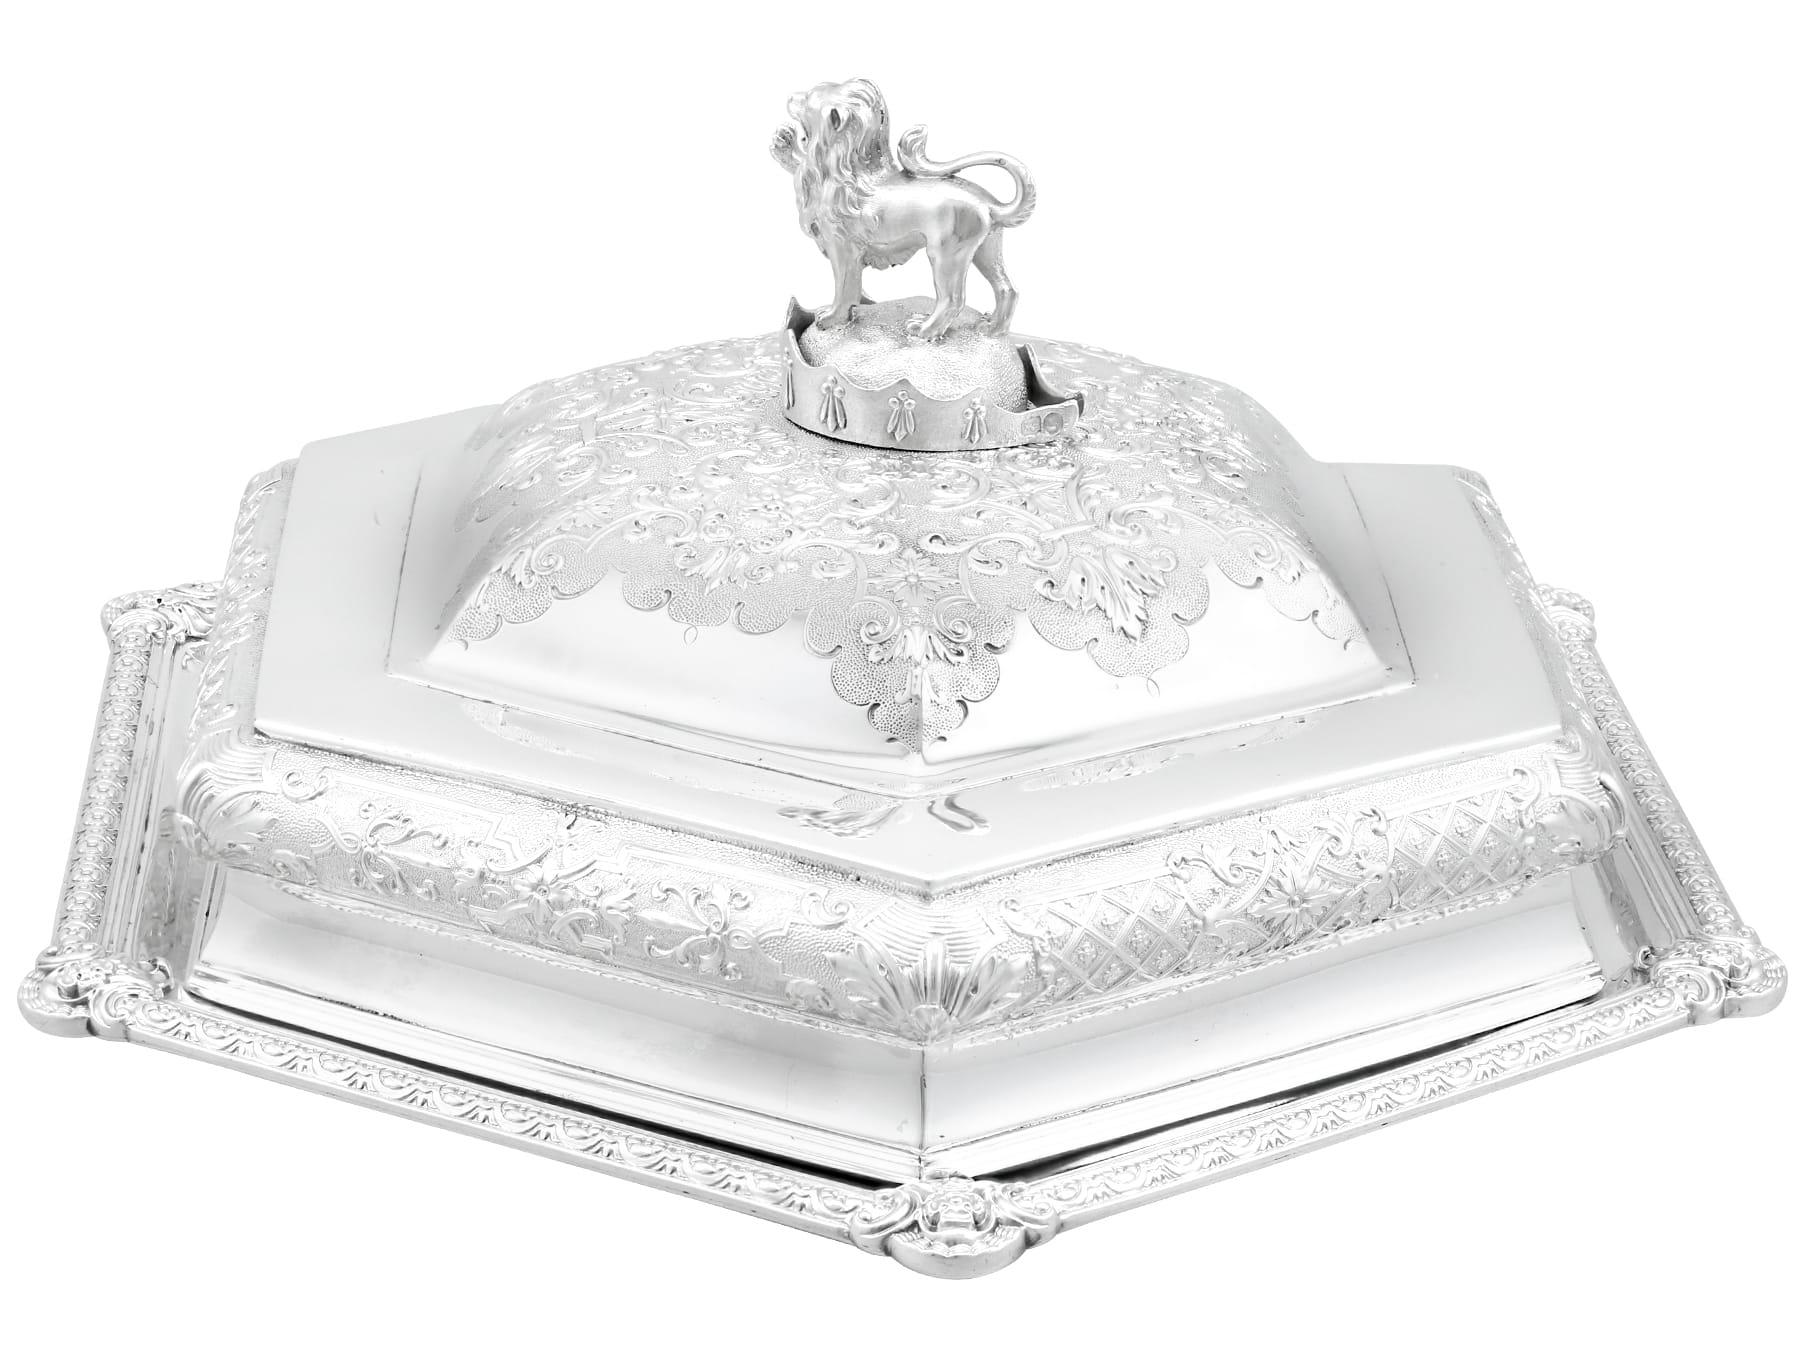 A magnificent, fine and impressive antique Victorian English sterling silver serving dish with cover made by Robert Garrard II; an addition to dining silverware collection

This magnificent antique Victorian sterling silver dish has a rounded